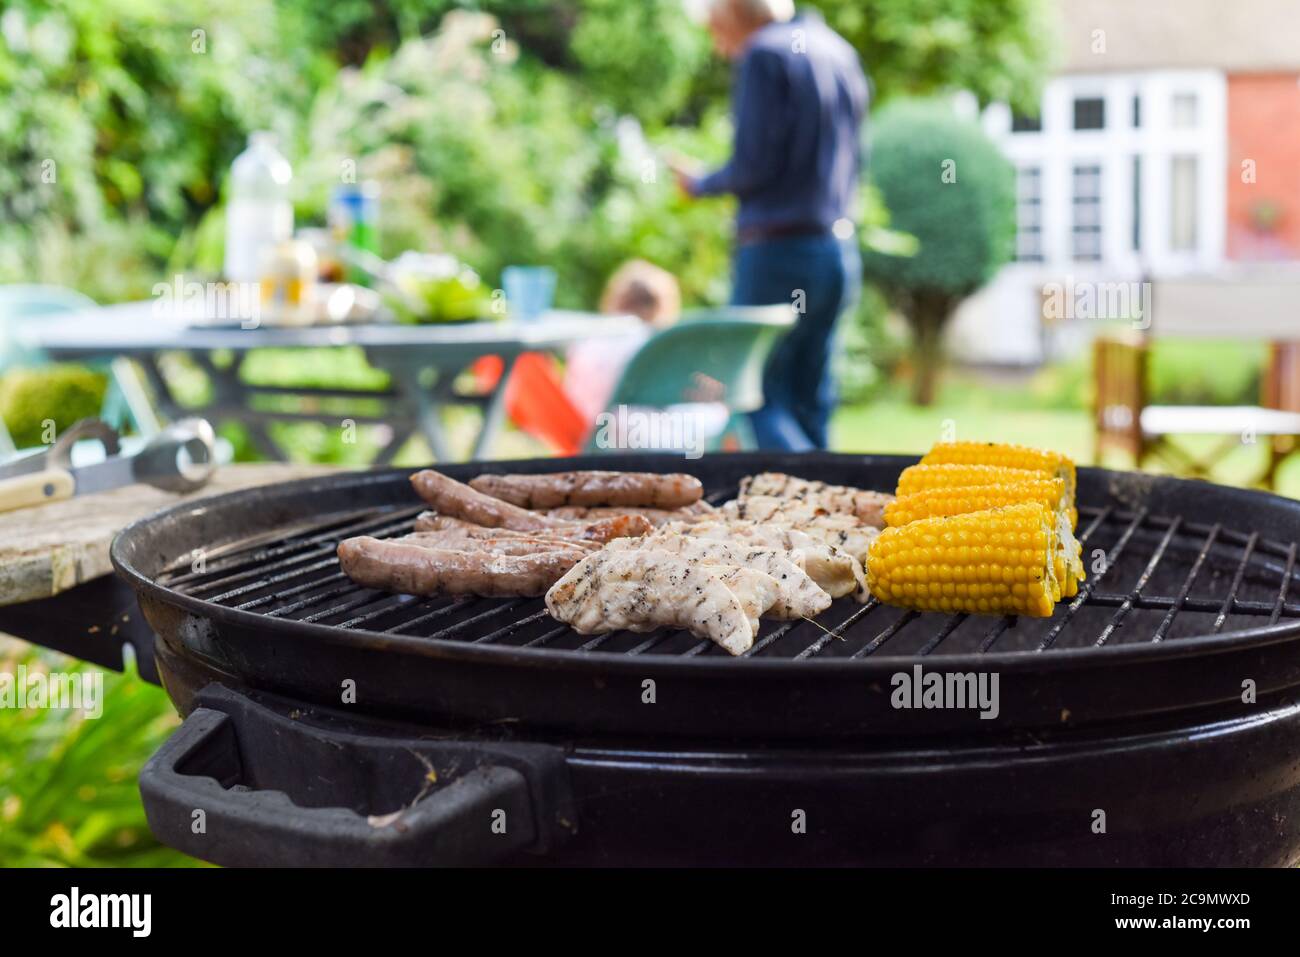 Family bbq outside in a garden with food on the barbecue grill cooking outdoors and people in the background Stock Photo